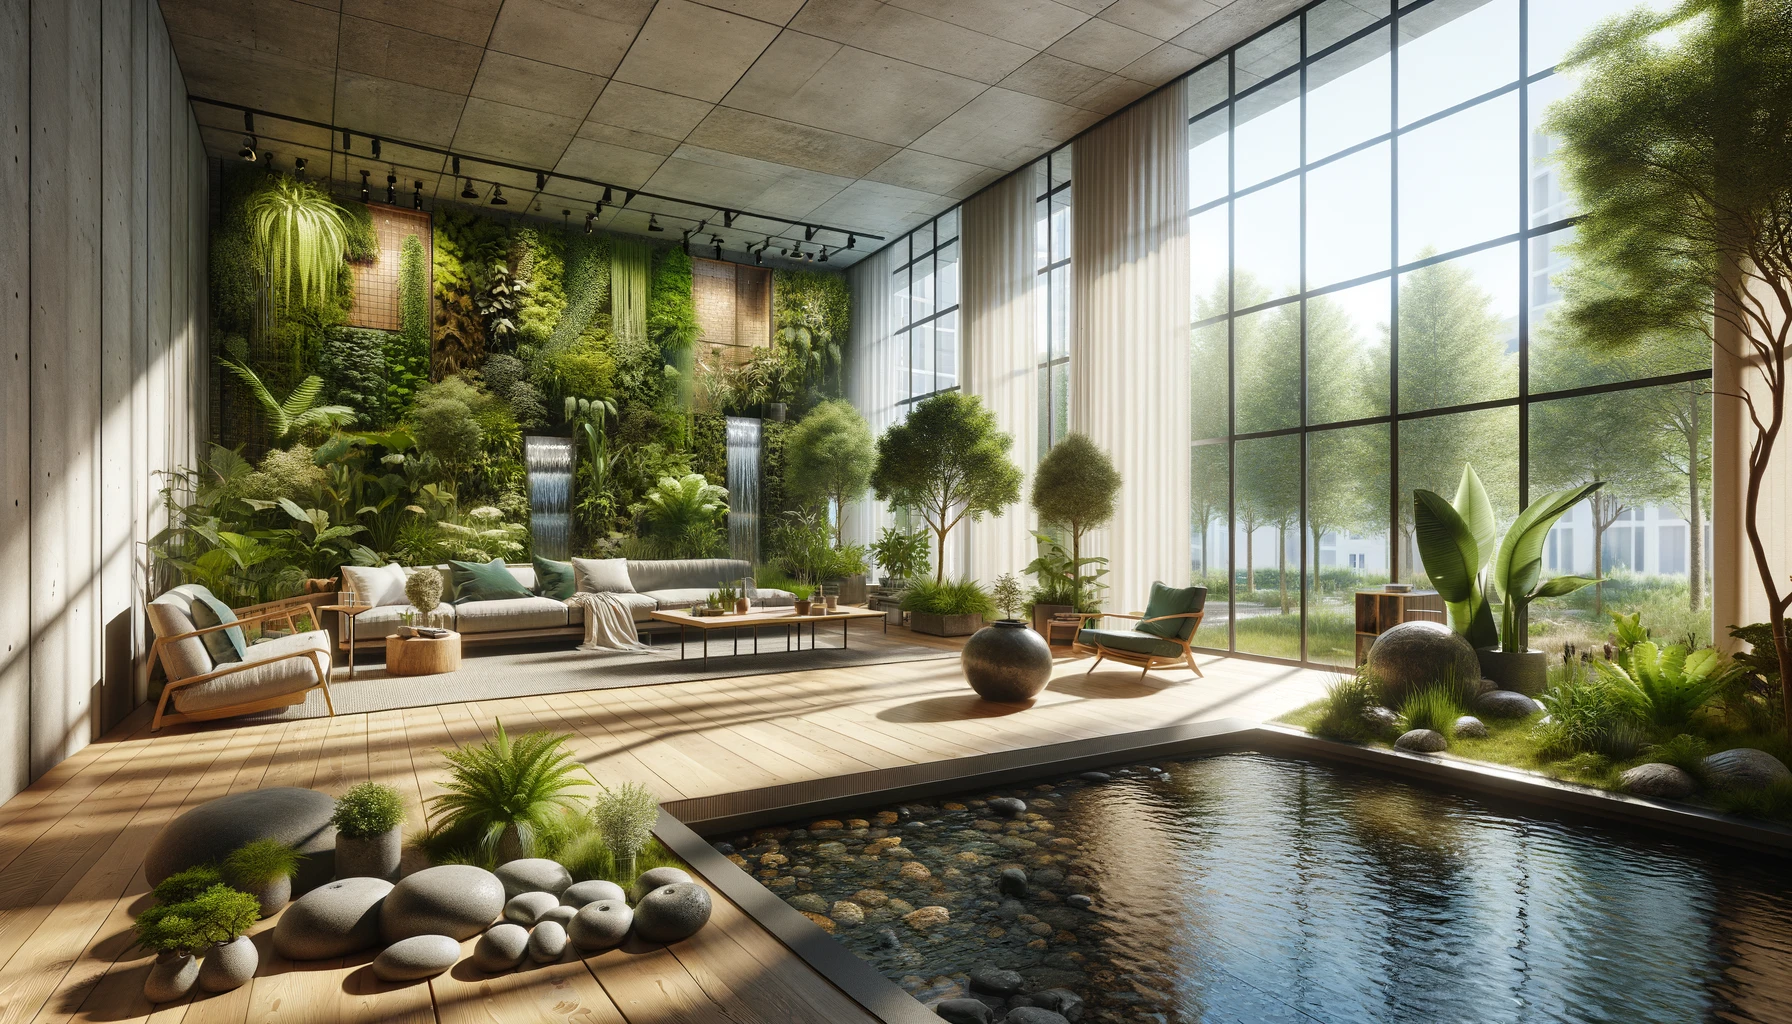 Discover how biophilic design can transform spaces, enhance well-being, and connect us to nature, with expert insights and practical tips for any environment.